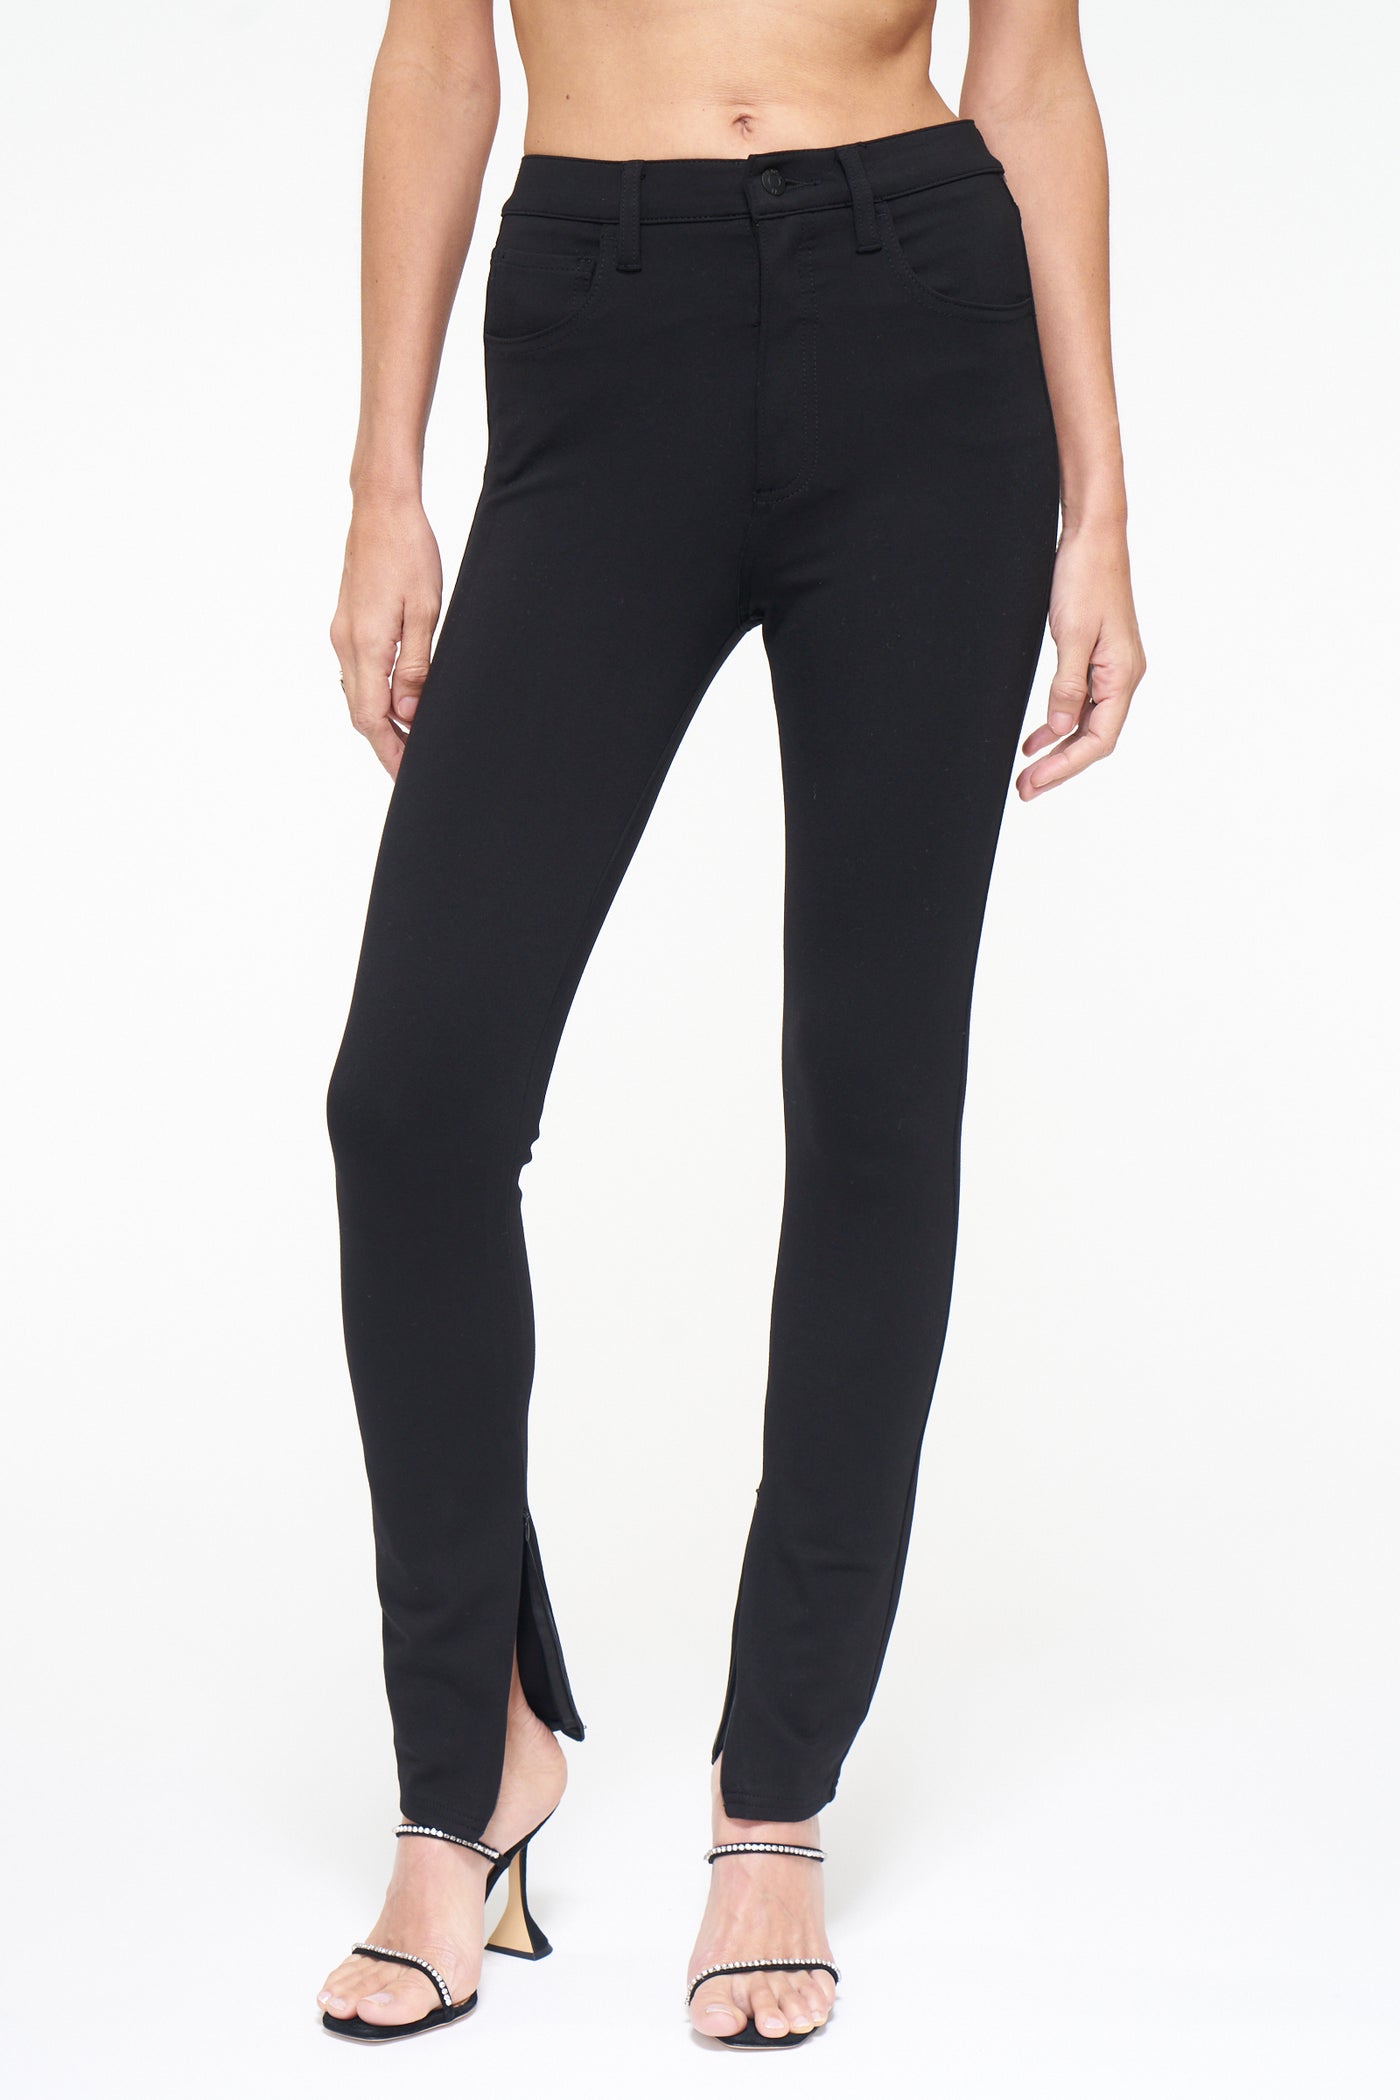 PISTOLA KENDALL HIGH RISE SKINNY SCUBA PANTS W/ ZIPPERS NIGHT OUT